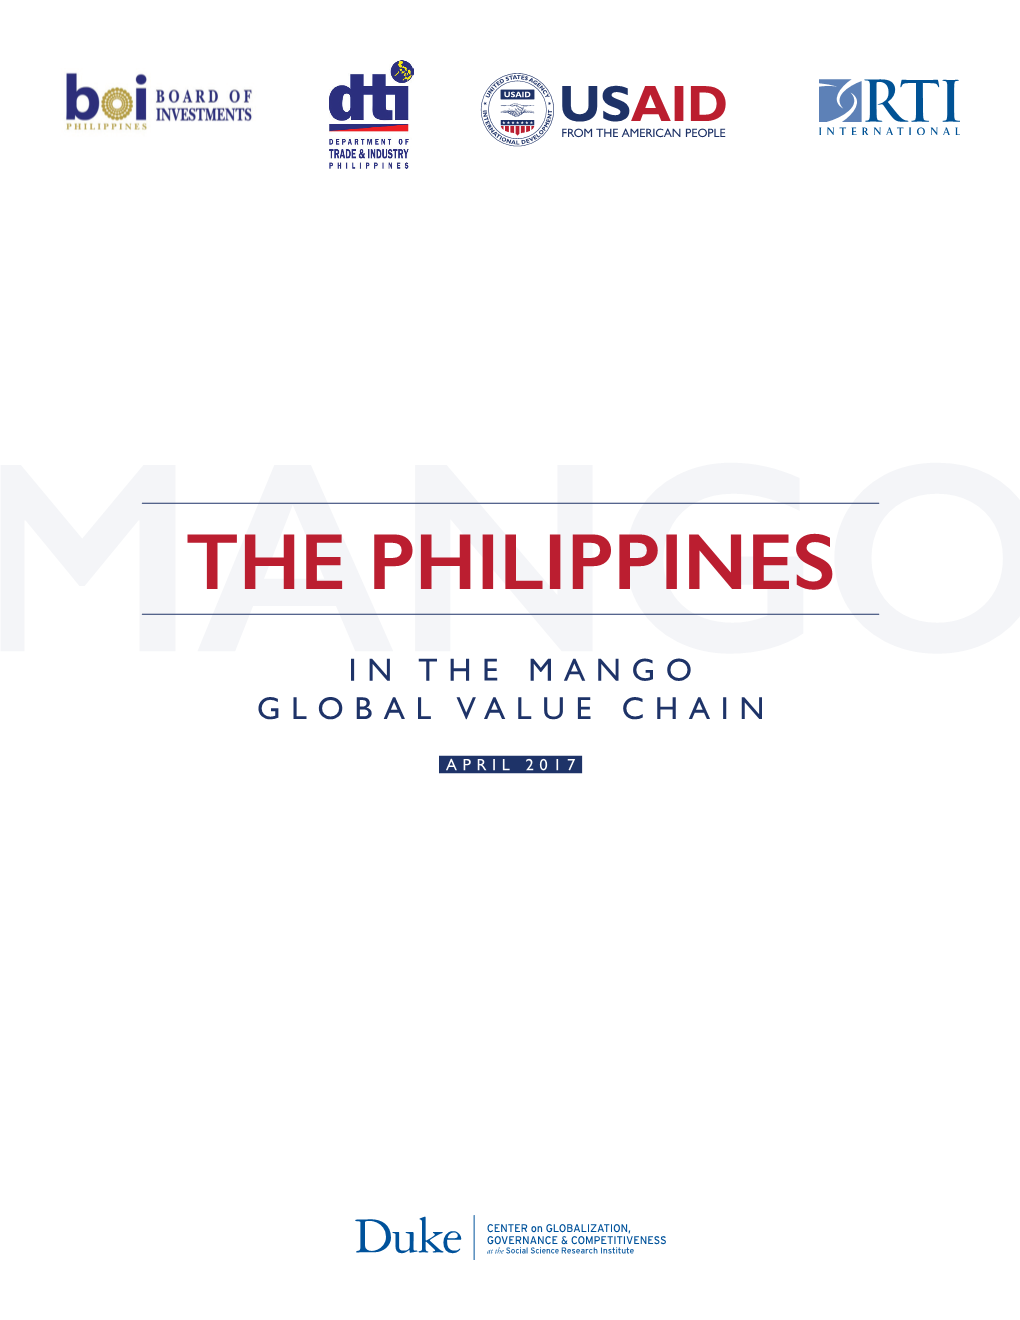 The Philippines in the Mango Global Value Chain